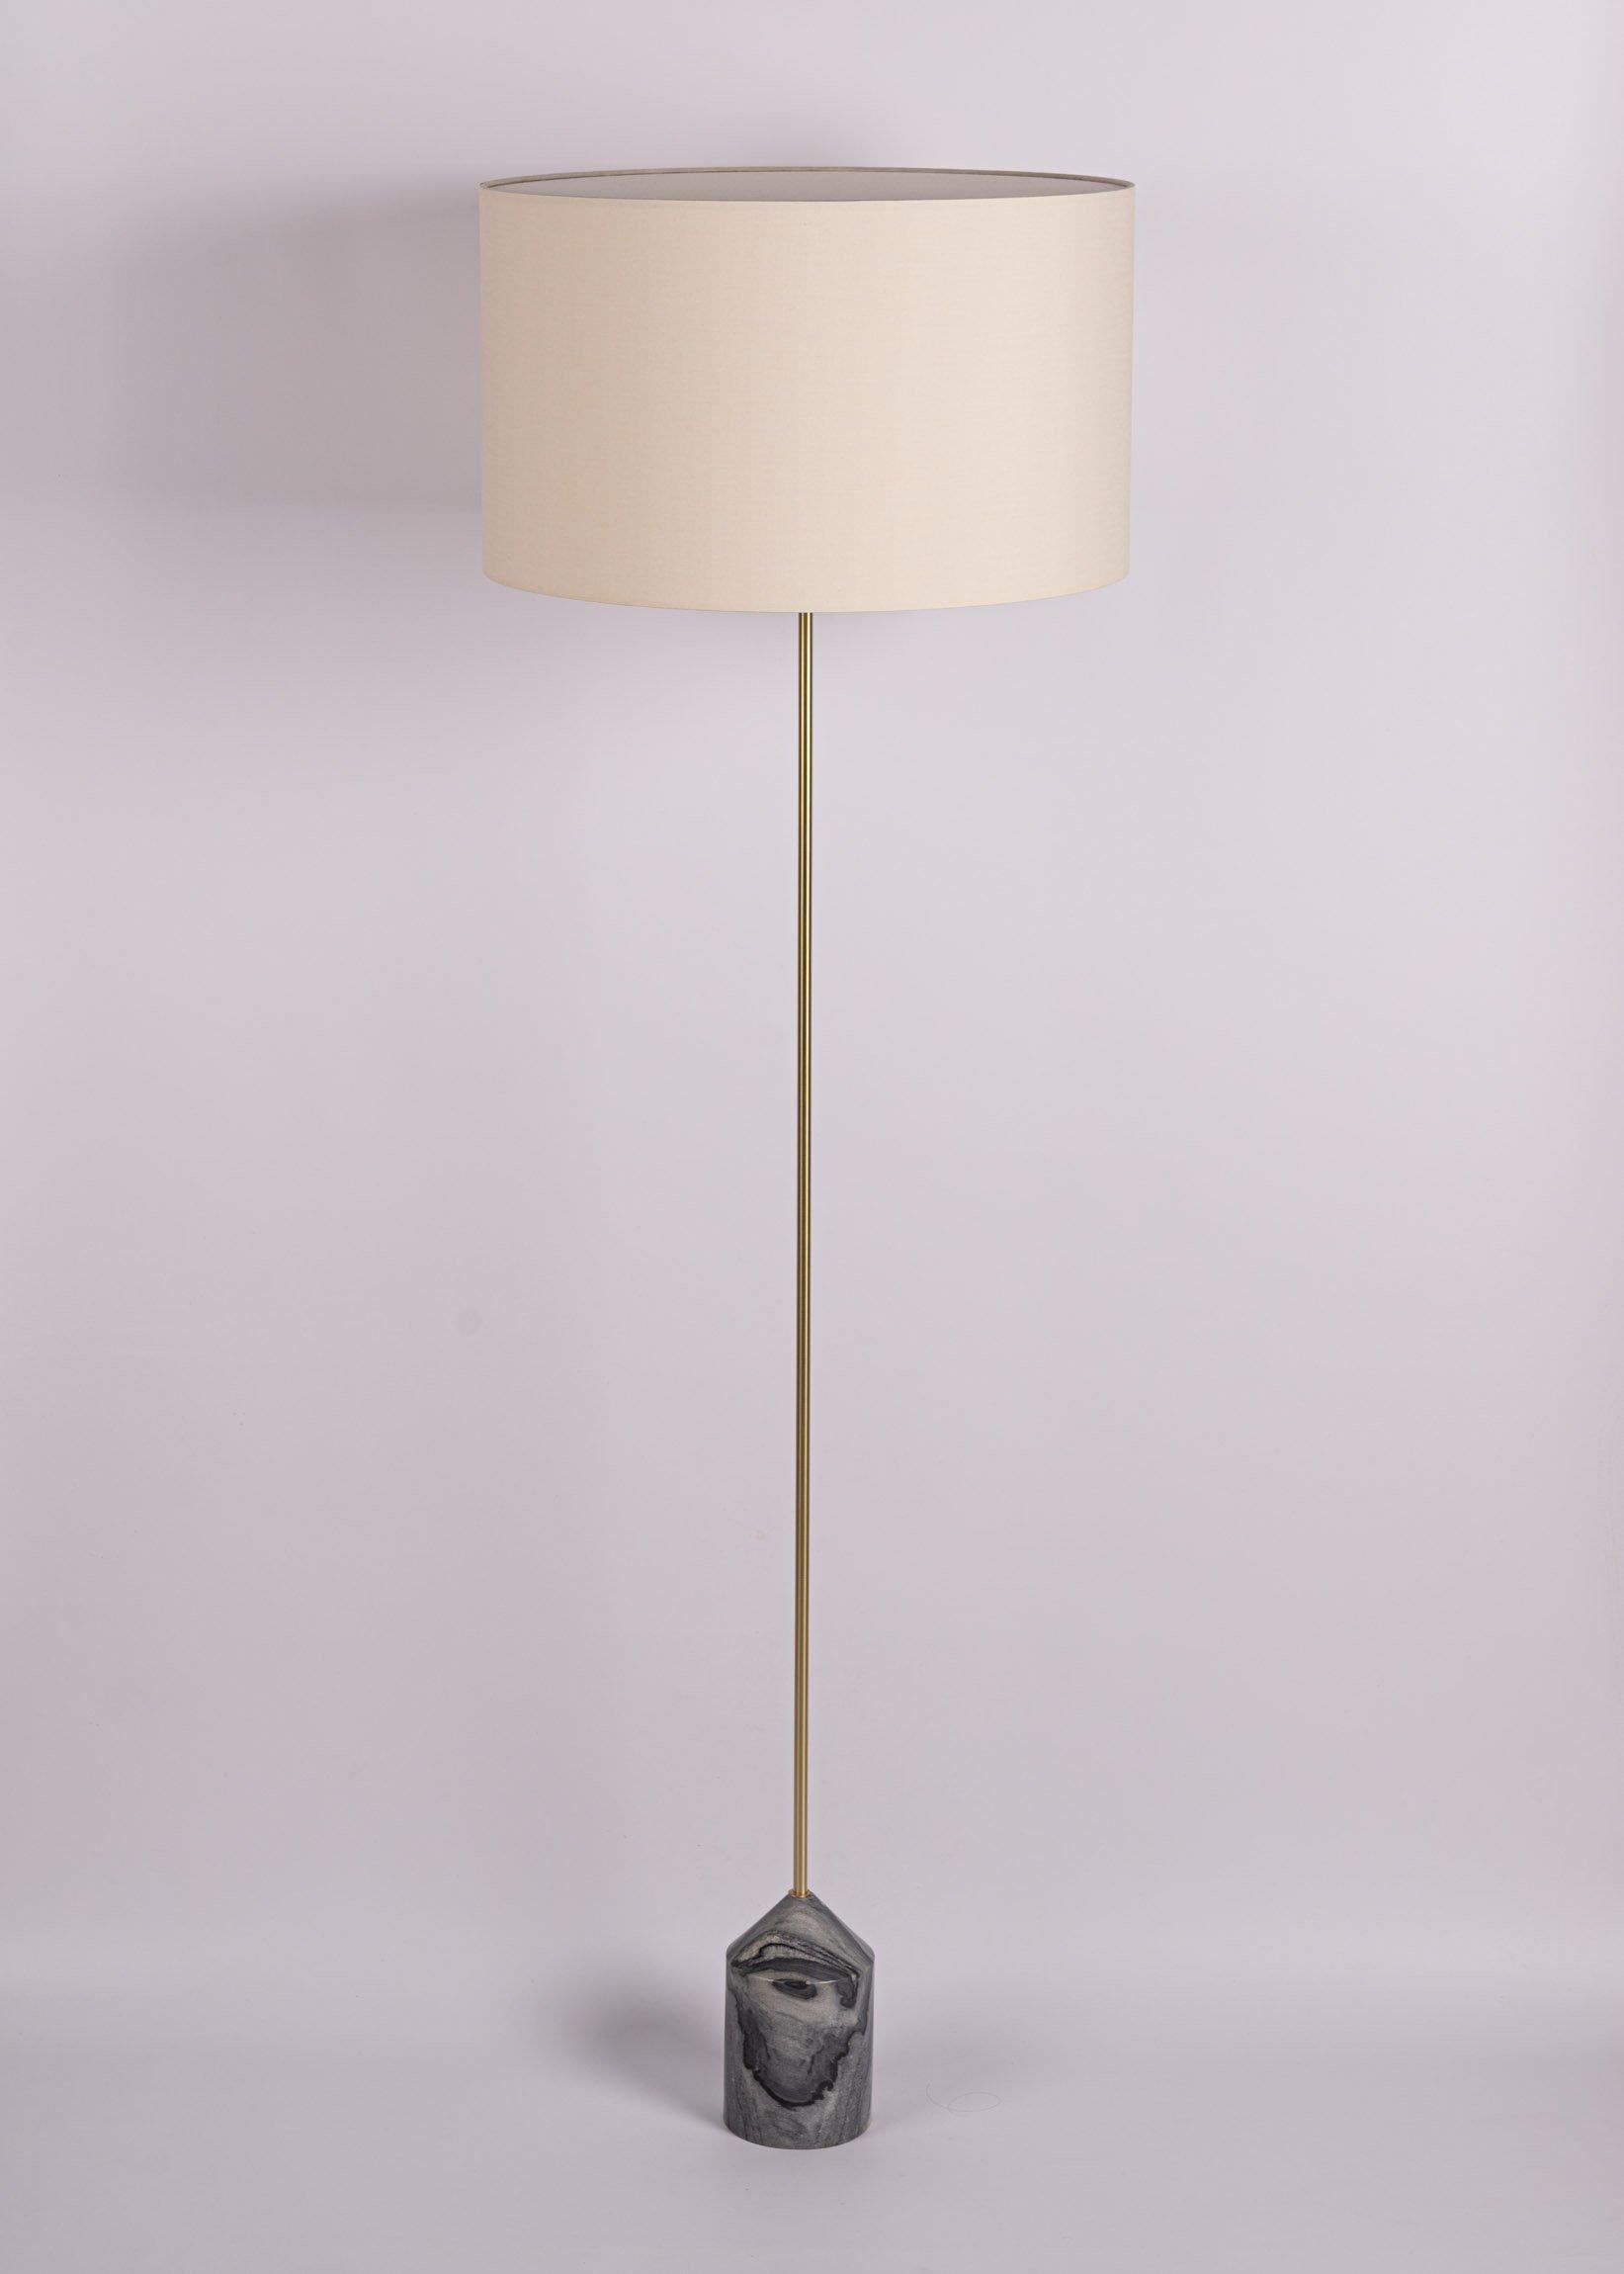 Baleto Black Marble Floor Lamp by Simone & Marcel
Dimensions: D 50 x W 50 x H 166 cm.
Materials: Brass, cotton and black marble.

Also available in different marble and alabaster options and finishes. Custom options available on request. Please